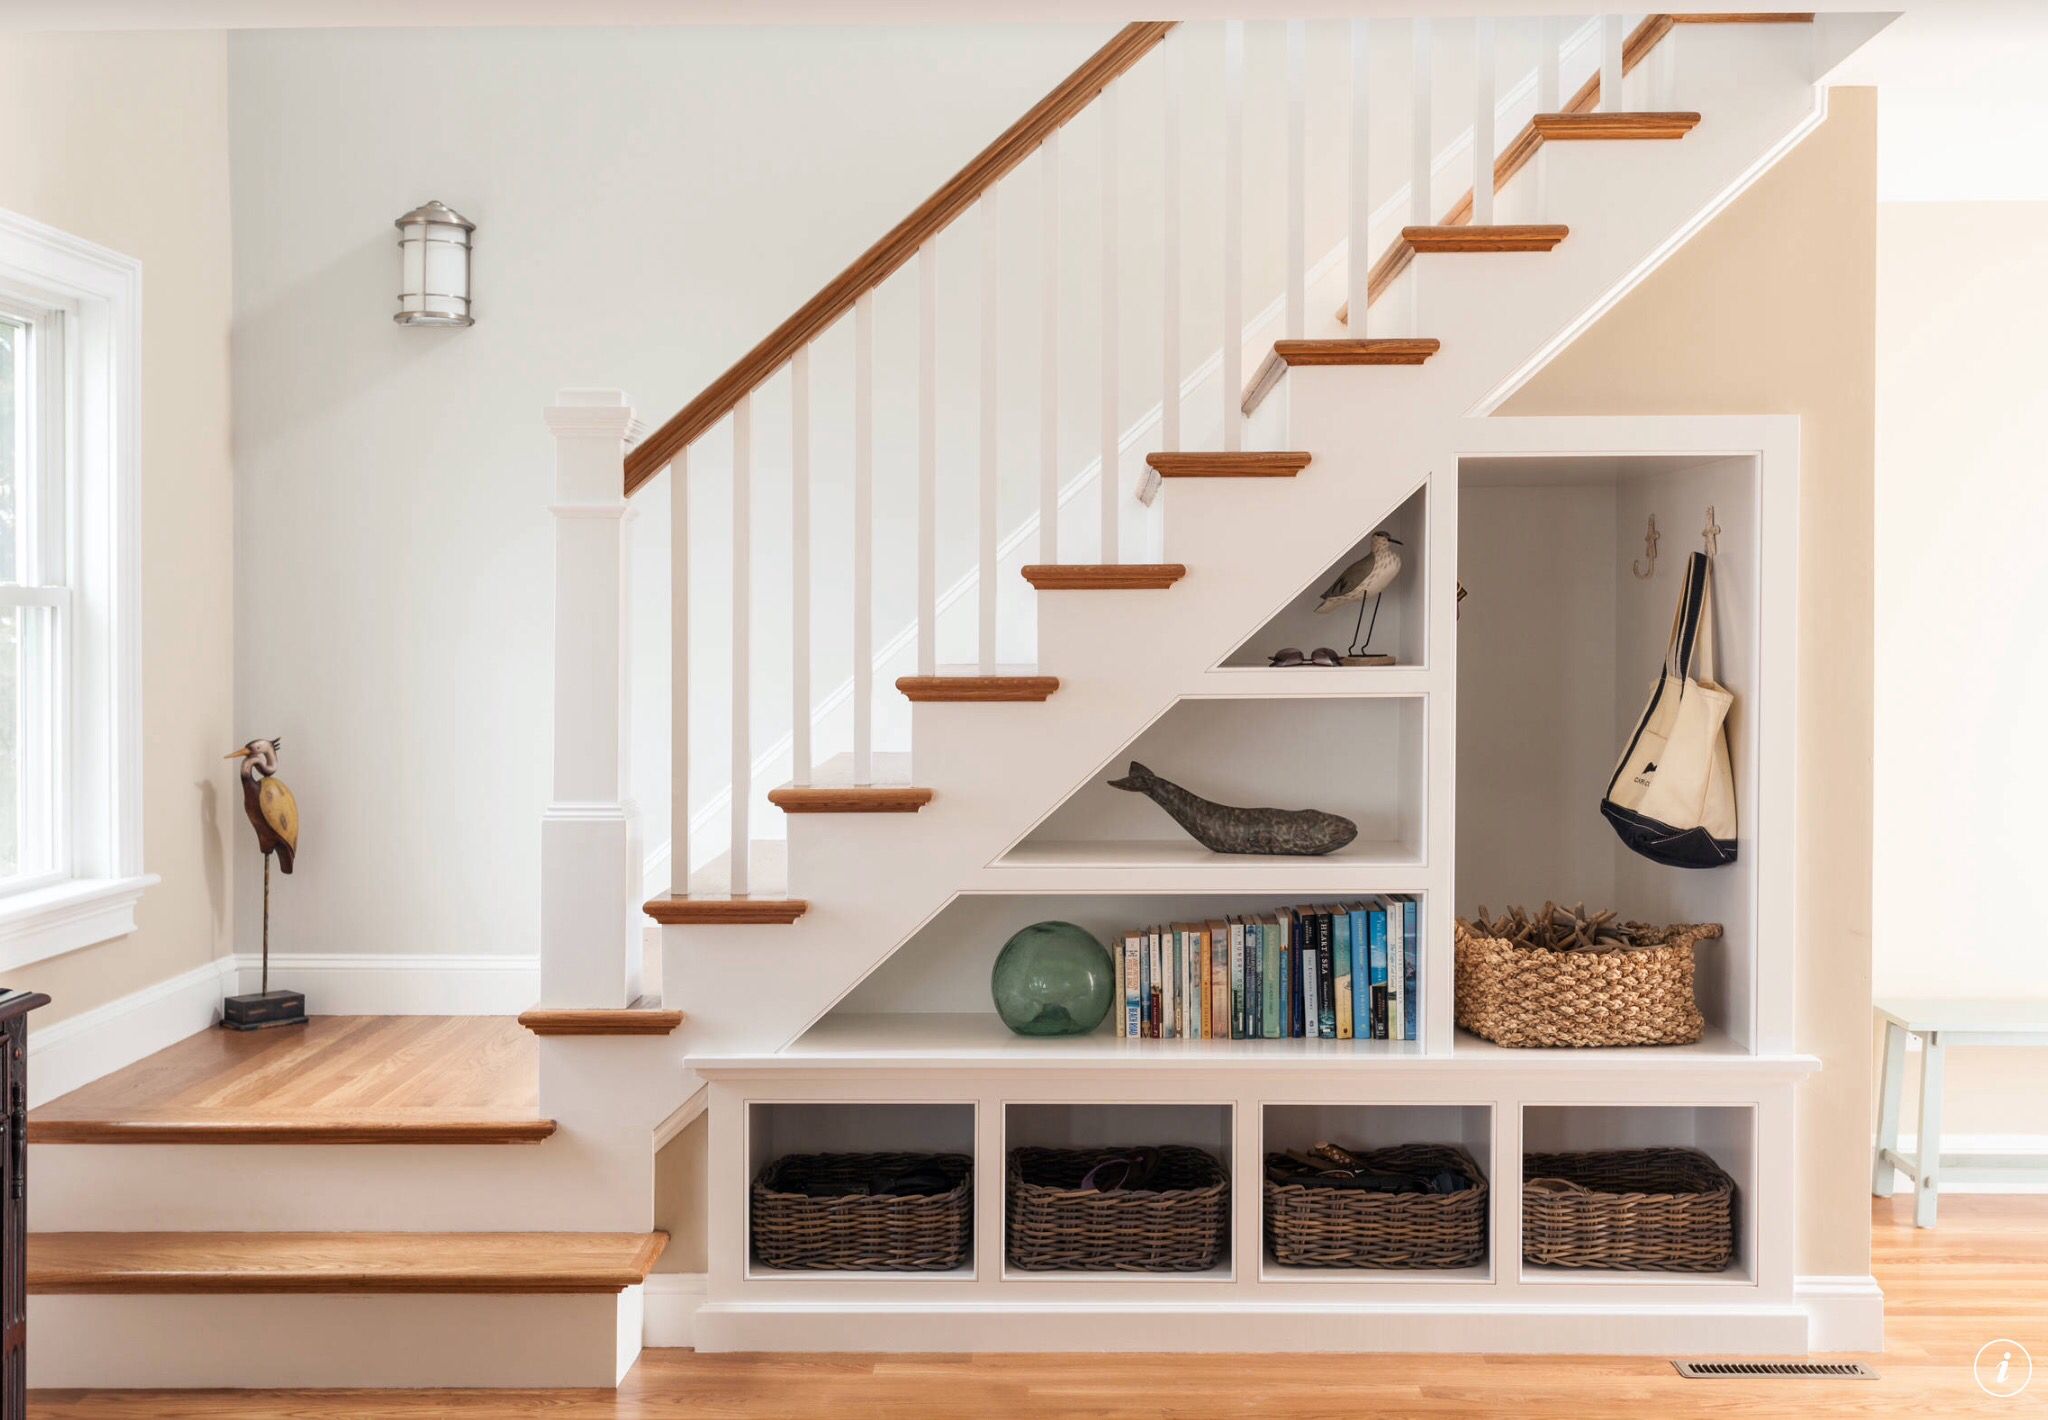 Store Showpieces by Adding Table or Shelf Beneath the Stair